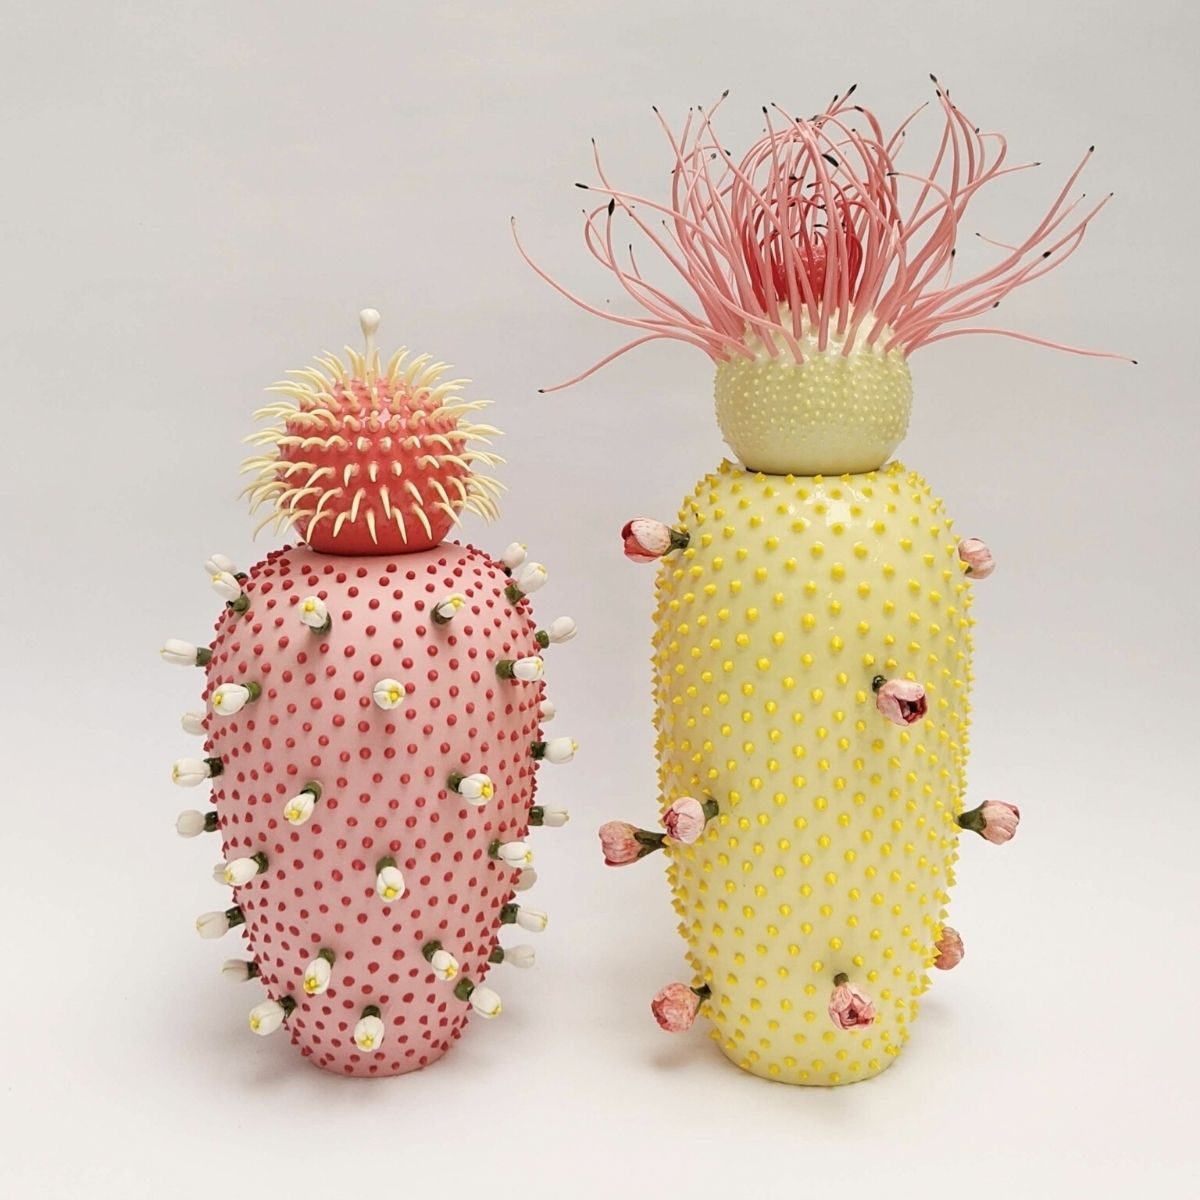 Delicate spikes and petals bloom in porcelain pieces by Avital Avital on Thursd